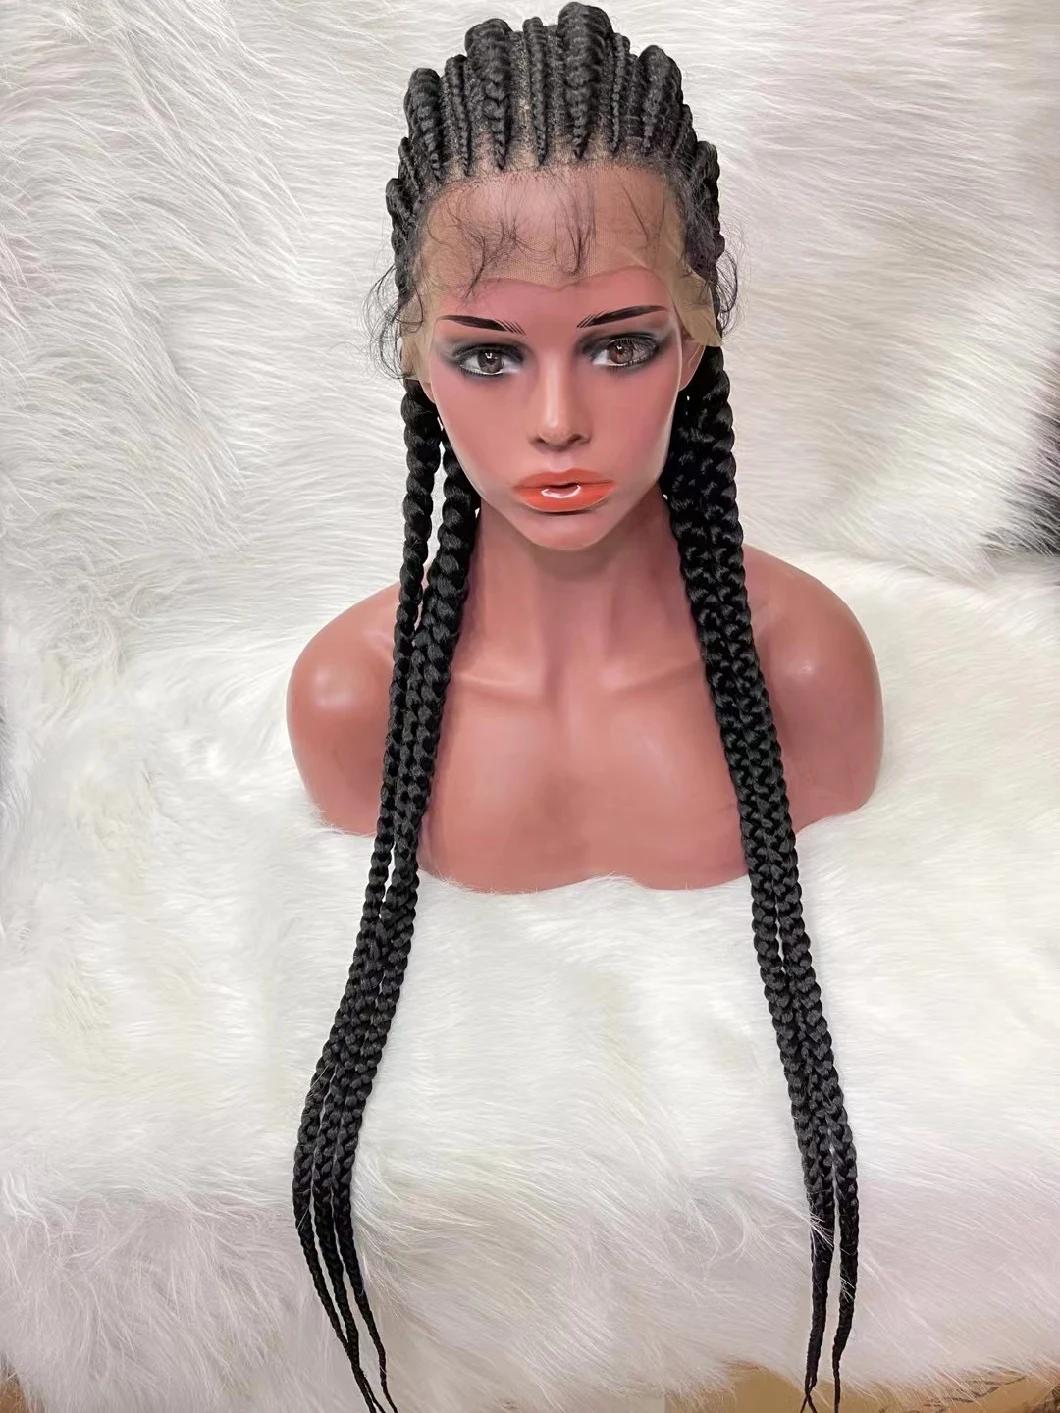 Tresse Cornrow Remy Lace Braided Wig for Black Women Braided Lace Front Wig African Glueless Box Braids Wig